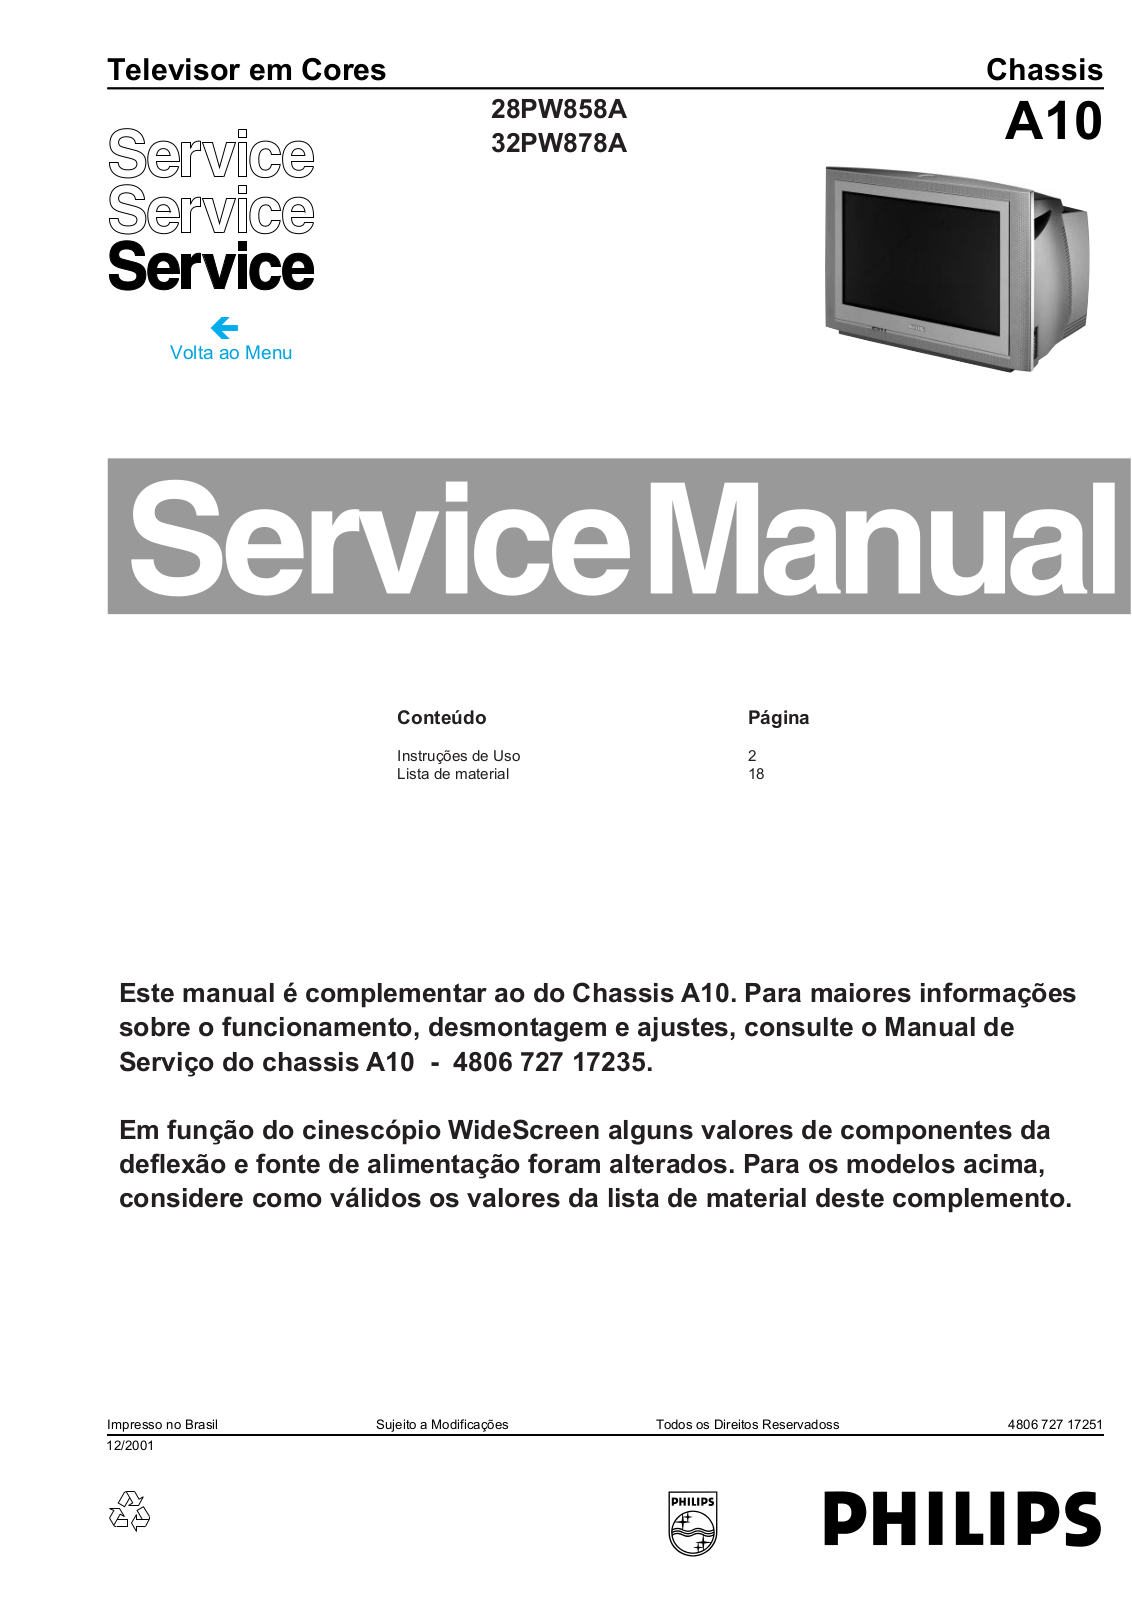 PHILIPS 28PW858A, 32PW878A Service Manual